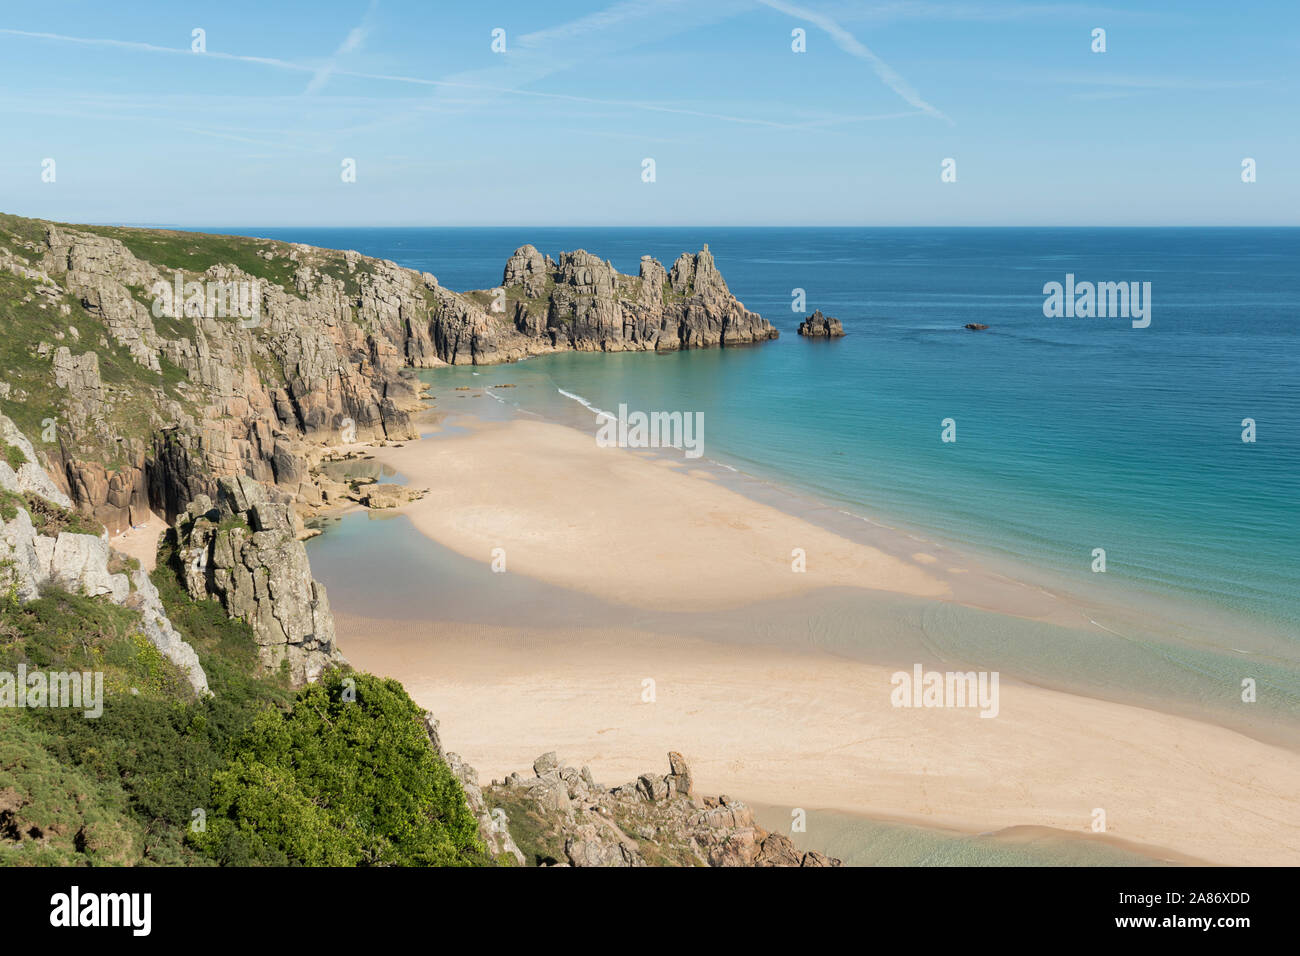 The crystal clear waters of Pedn Vounder as viewed from the clifftop South West Coast Path above the beach, Cornwall. Stock Photo